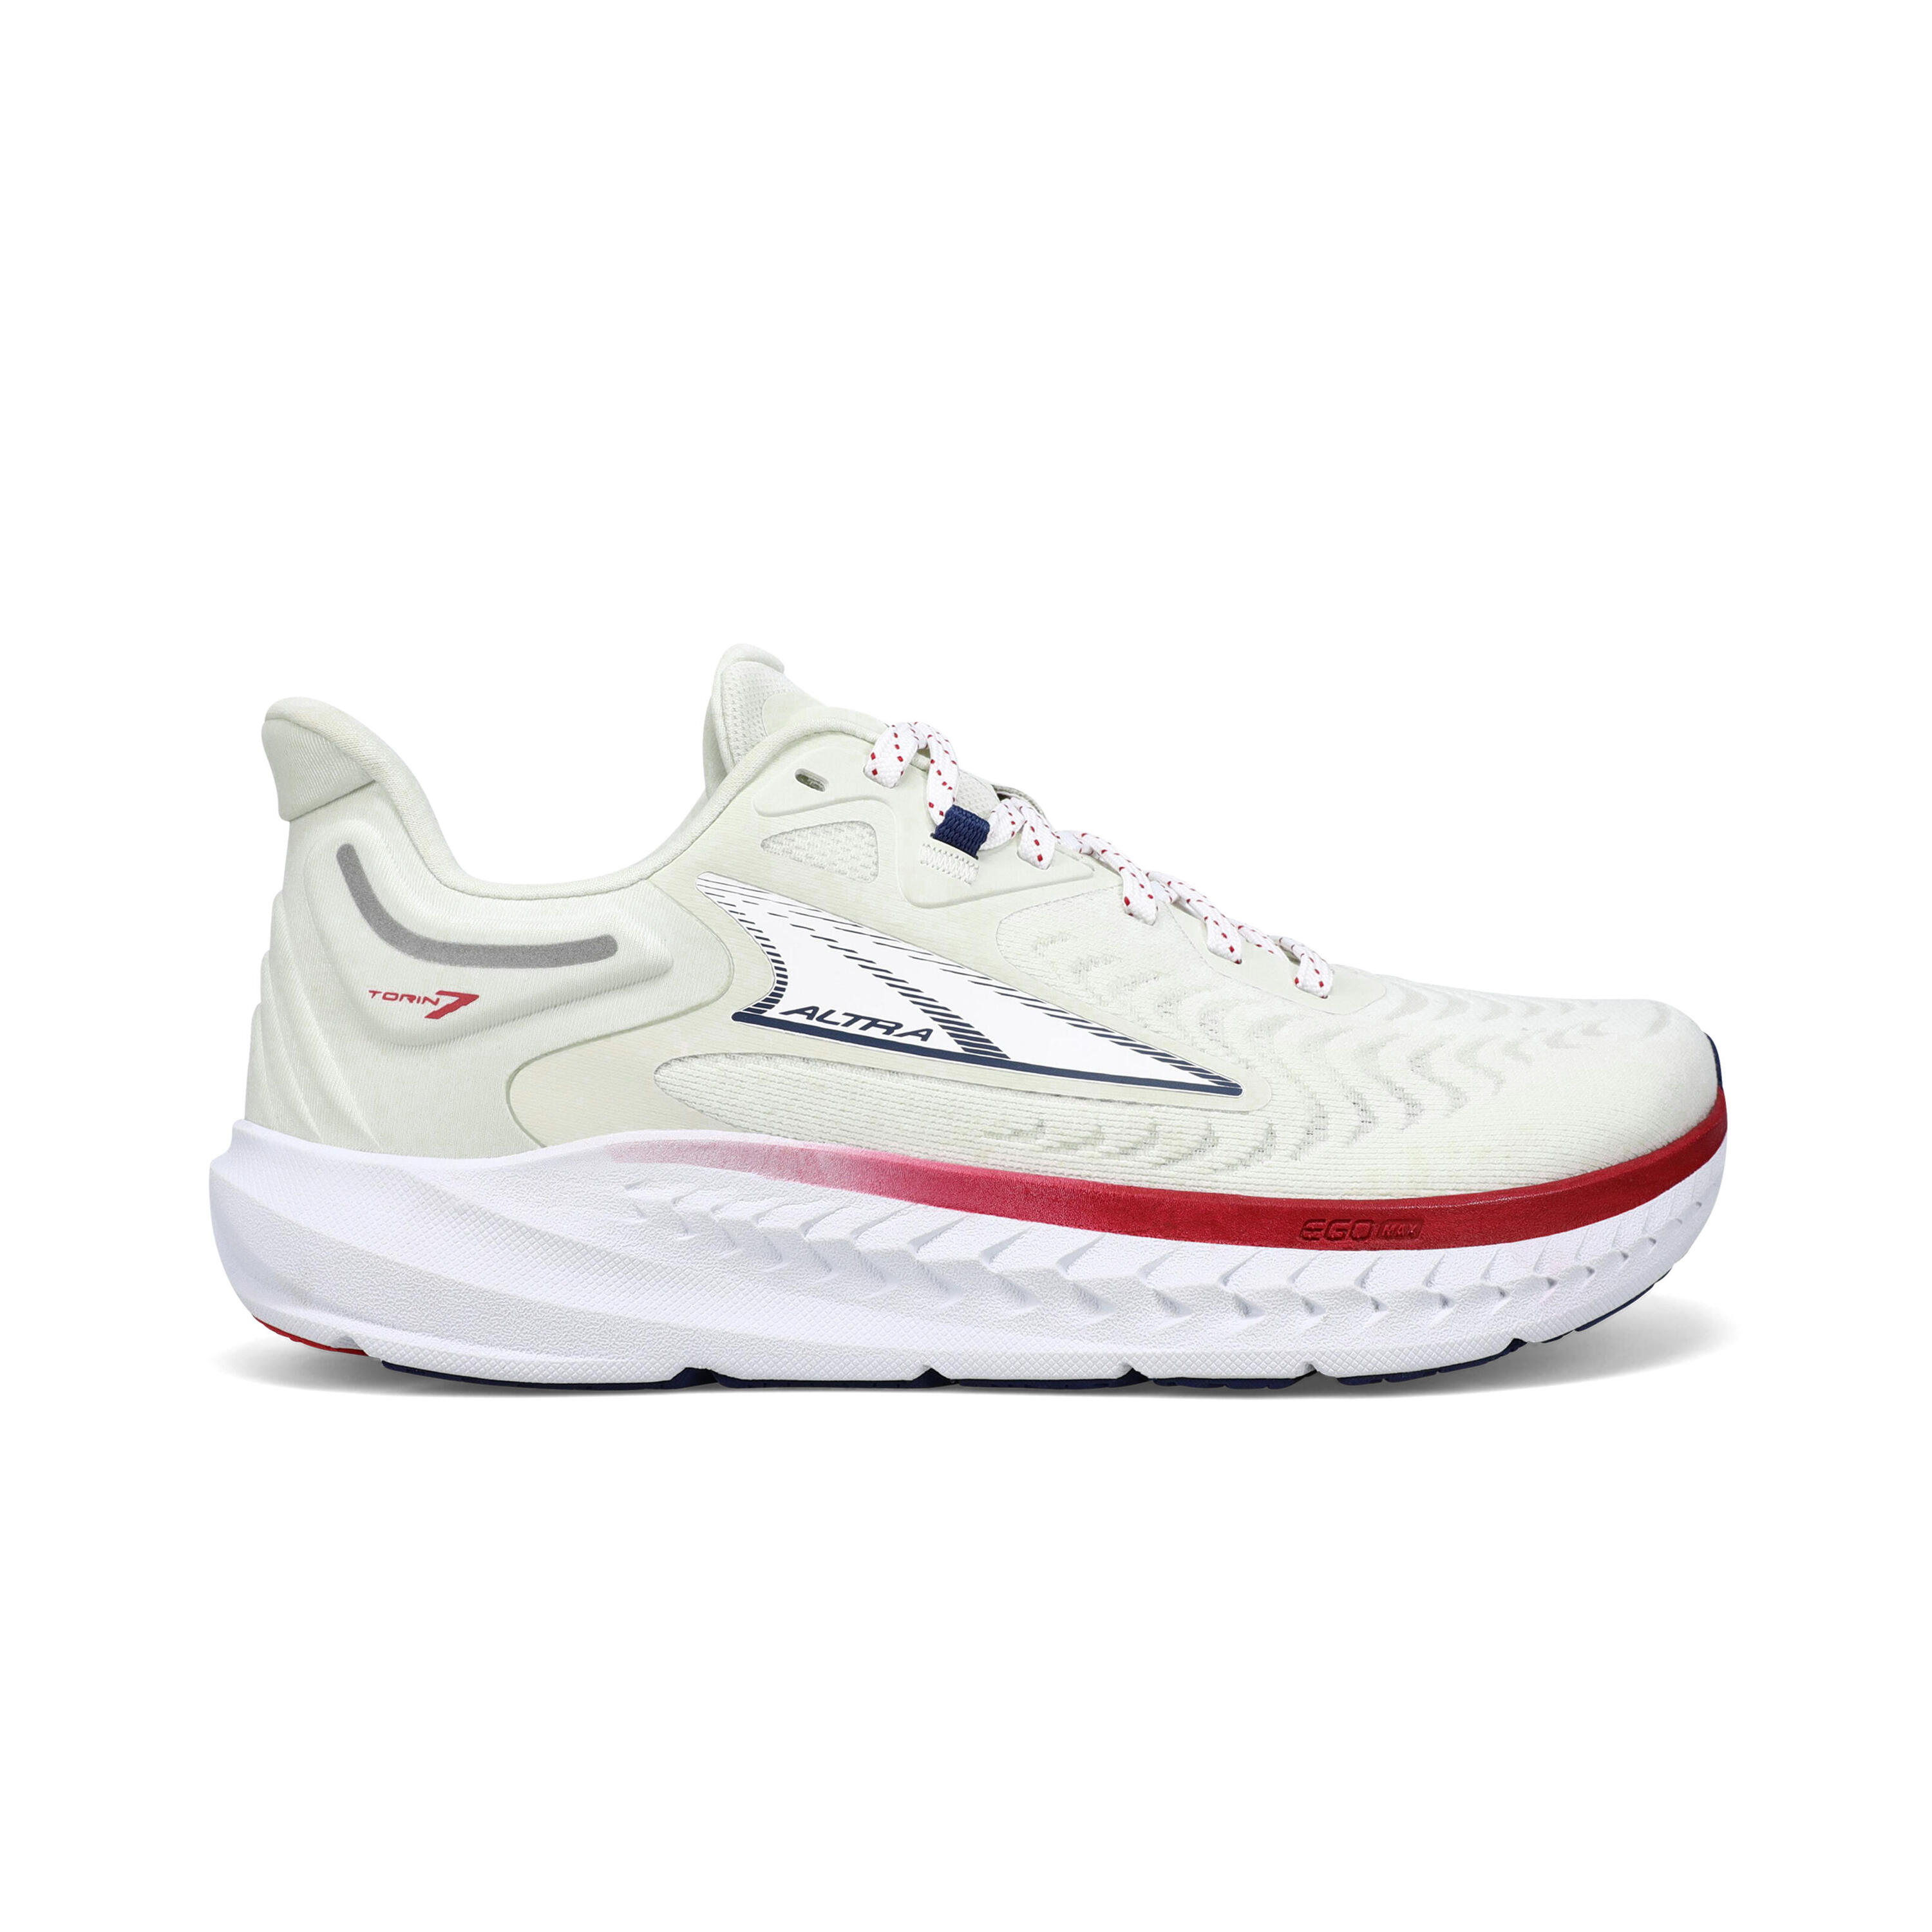 ALTRA Altra Torin 7 Womens Running Shoes White